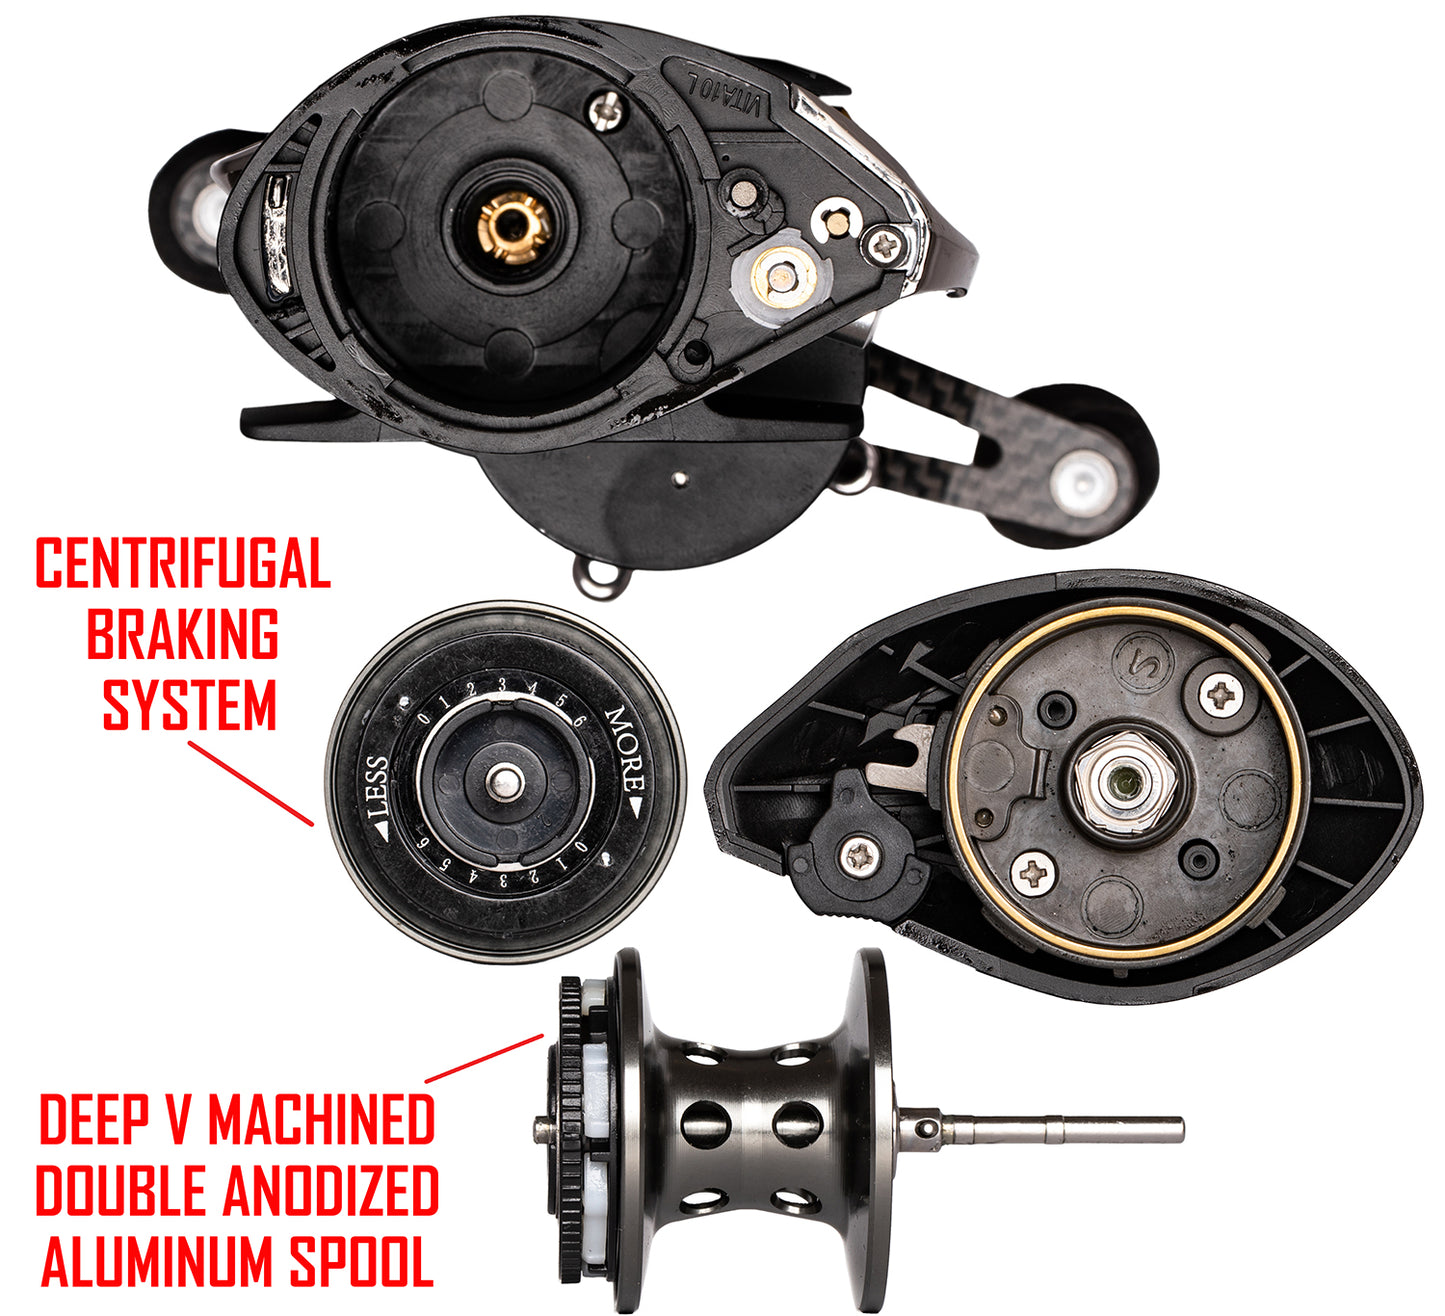 C-FORCE BAITCASTING REEL - LEFT HAND. RED text:  CENTRIFUGAL BRAKING SYSTEM, DEEP V MACHINED DOUBLE ANODIZED ALUMINUM SPOOL